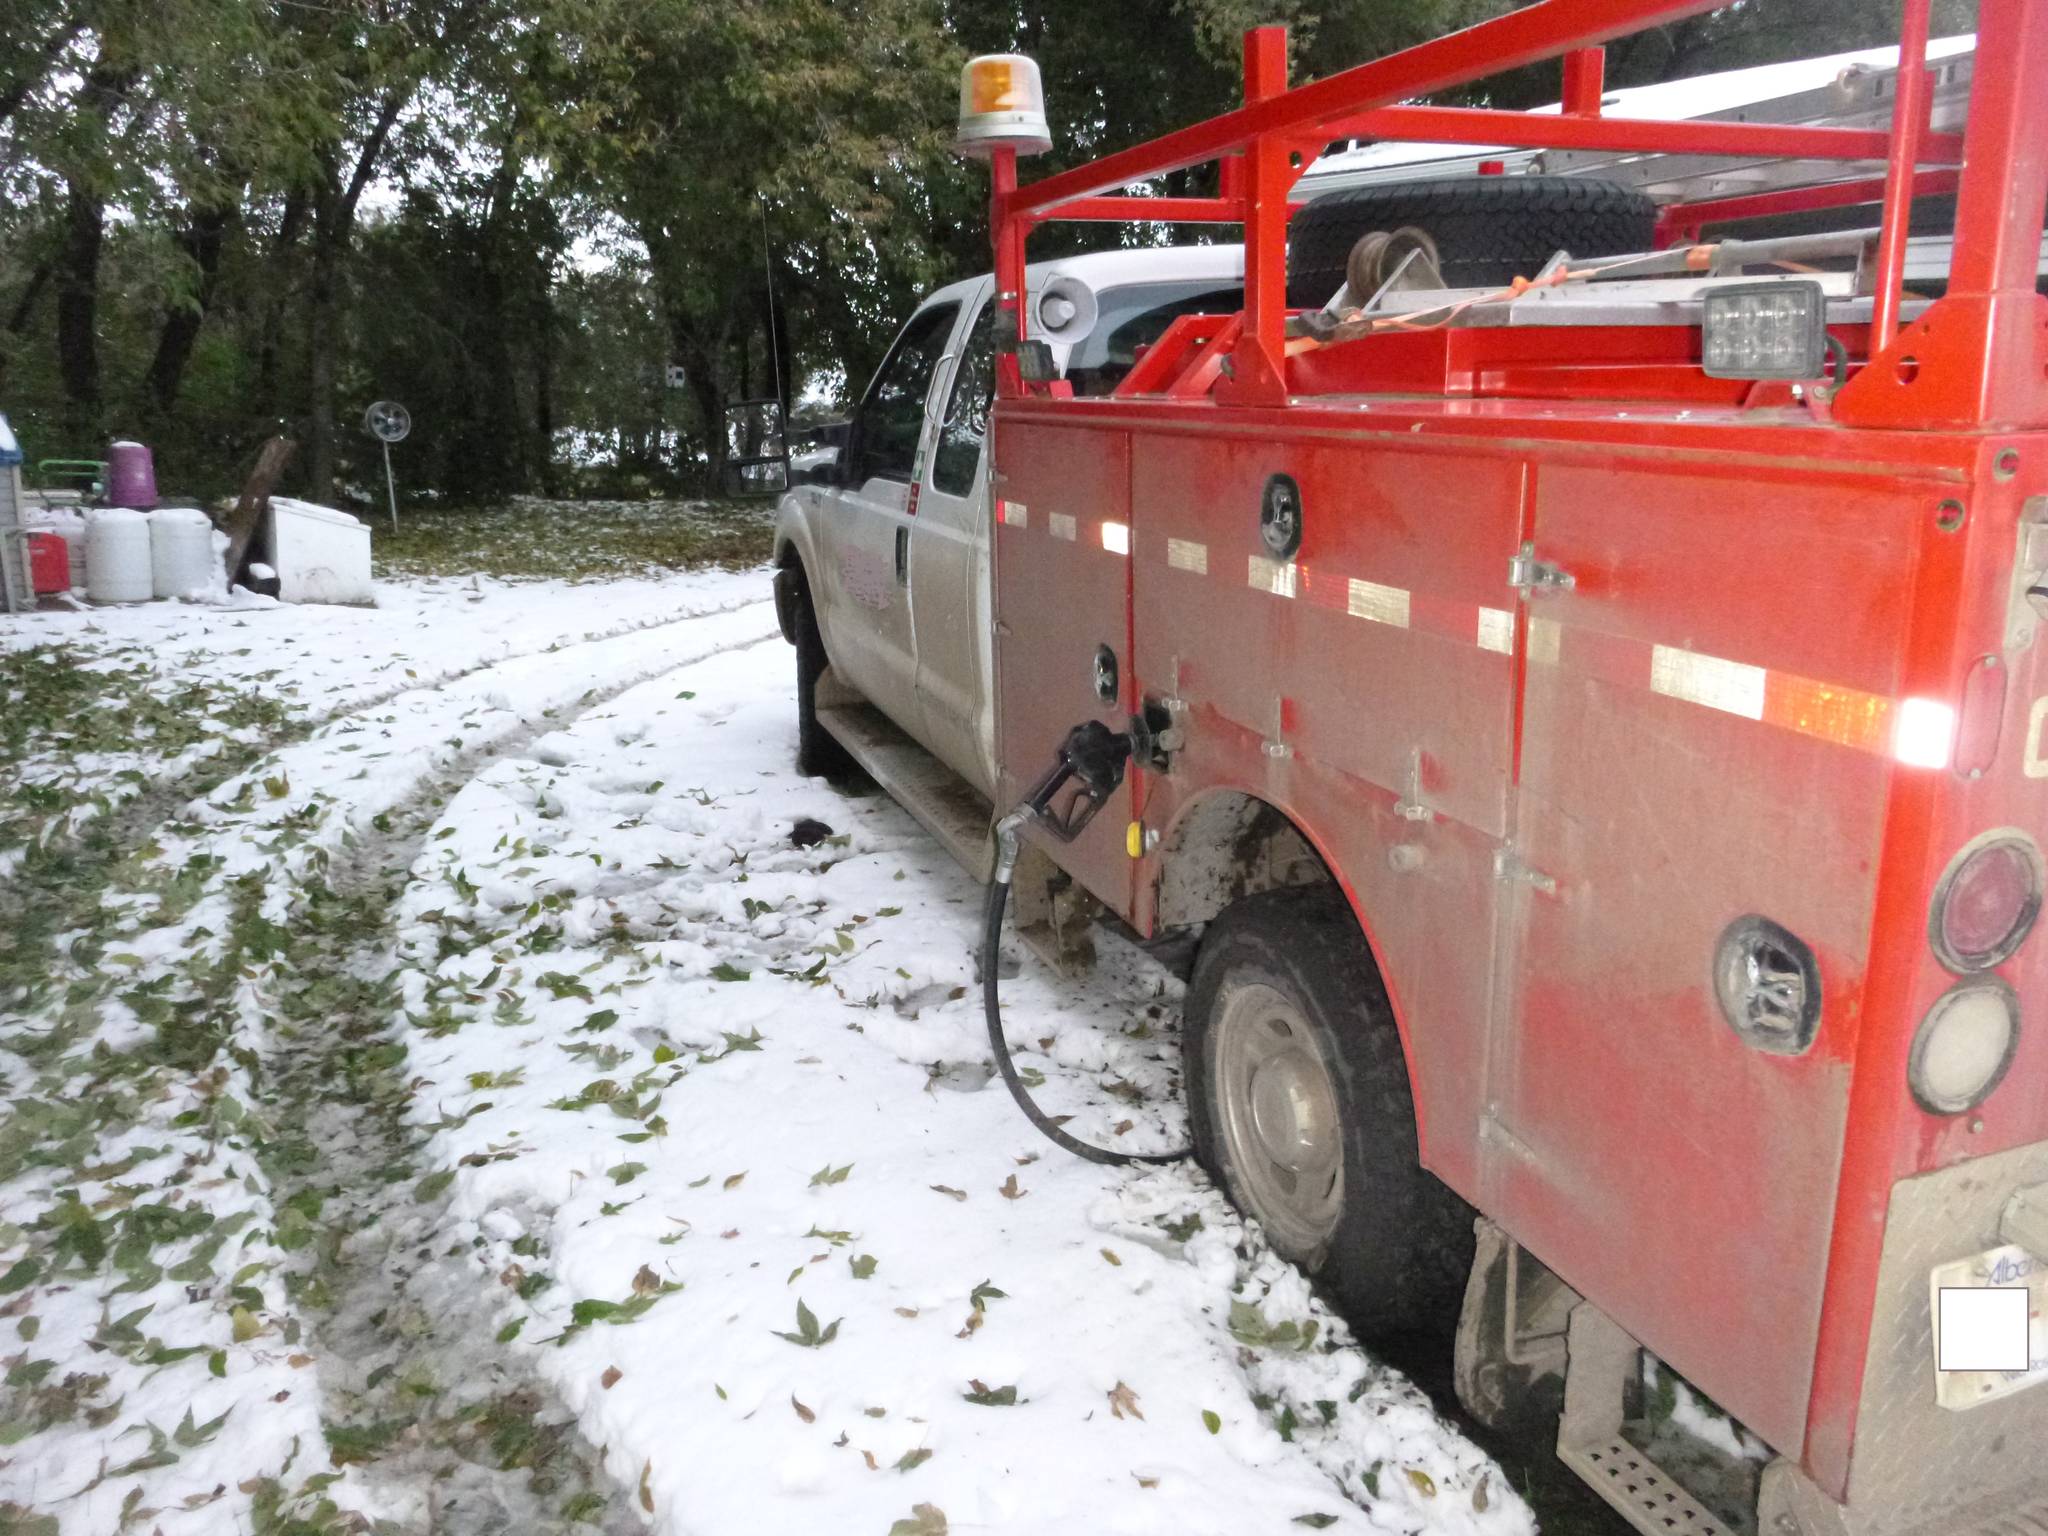 Ponoka RCMP have charged a 30-year-old woman with the alleged theft of this rail maintenance truck while it was still being fueled up on Sunday afternoon. The hose was ripped off the pump and remained on the truck where it was located north of Ponoka.                                RCMP photo